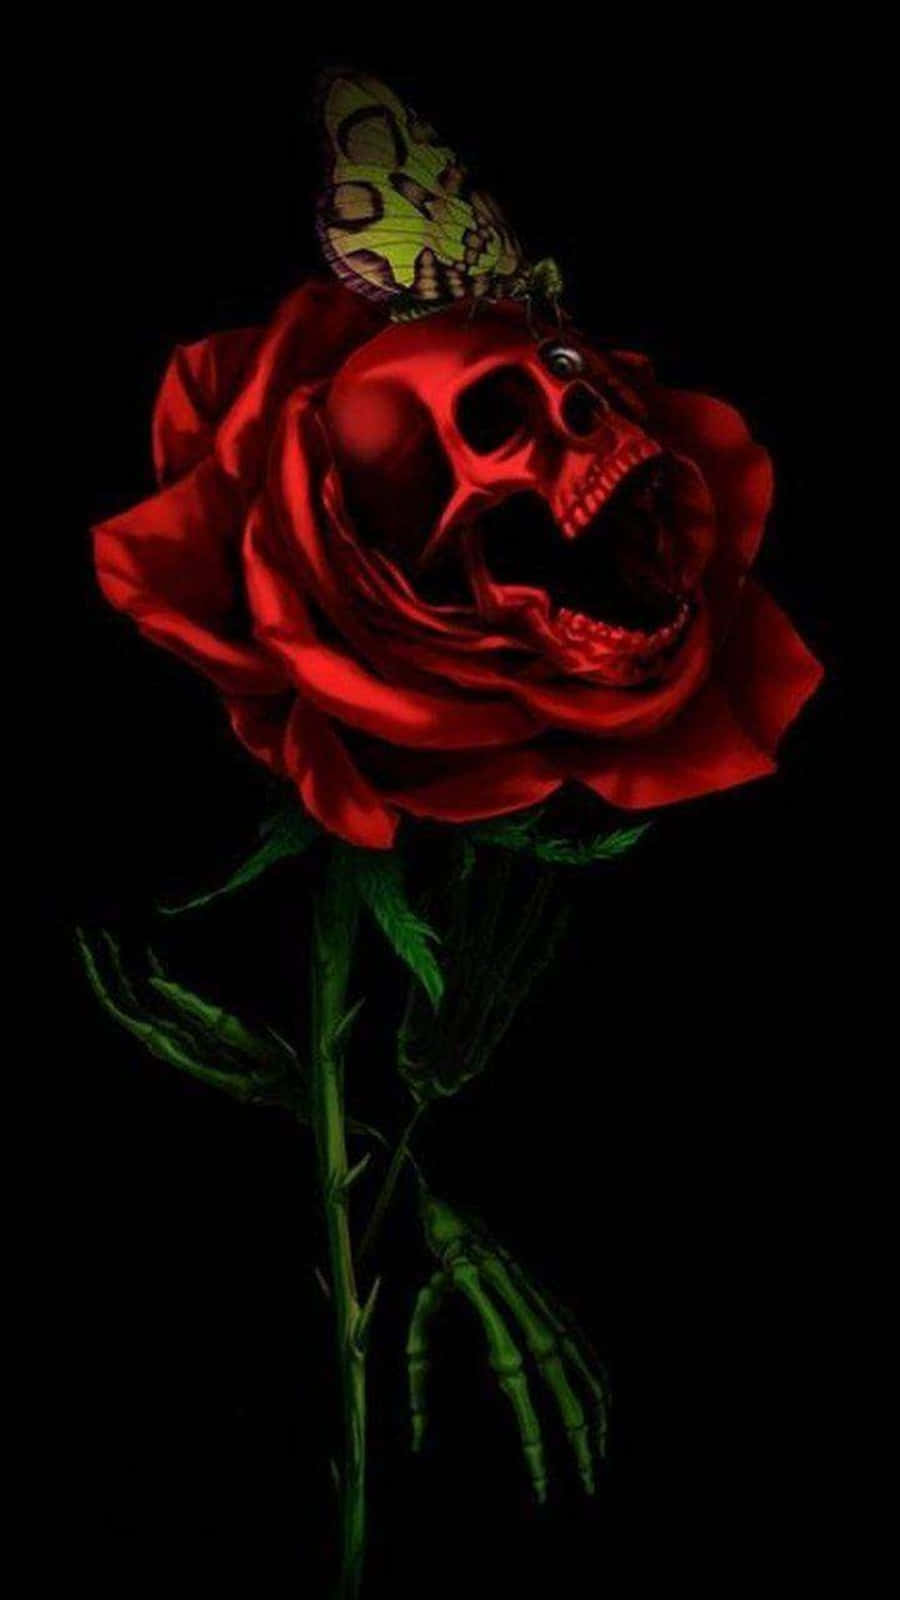 Roses and skulls accentuate the beauty and fragility of life. Wallpaper